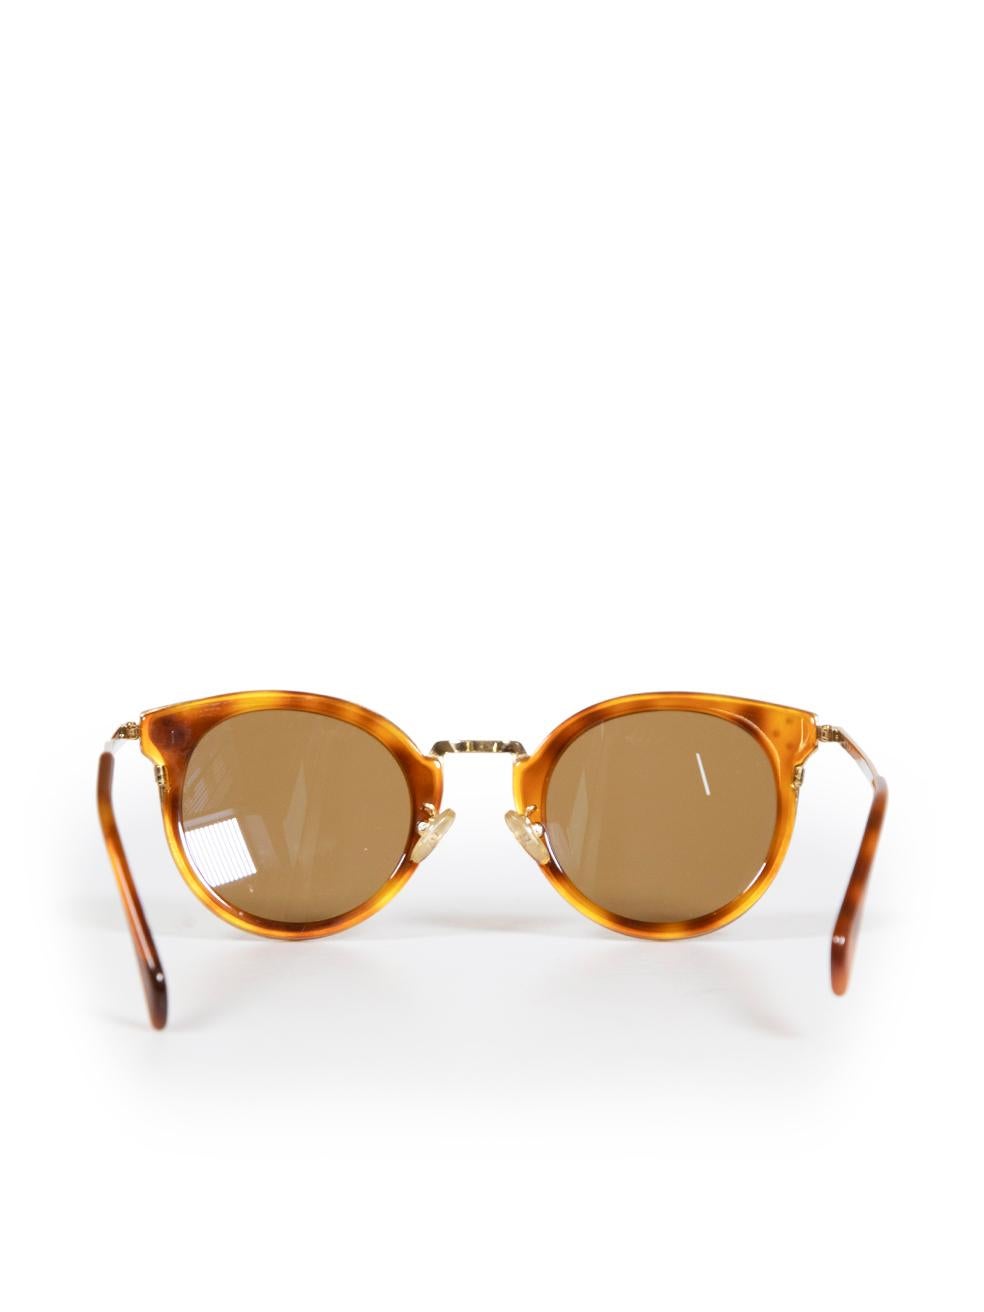 Céline Brown Round Tortoiseshell Sunglasses In Good Condition For Sale In London, GB